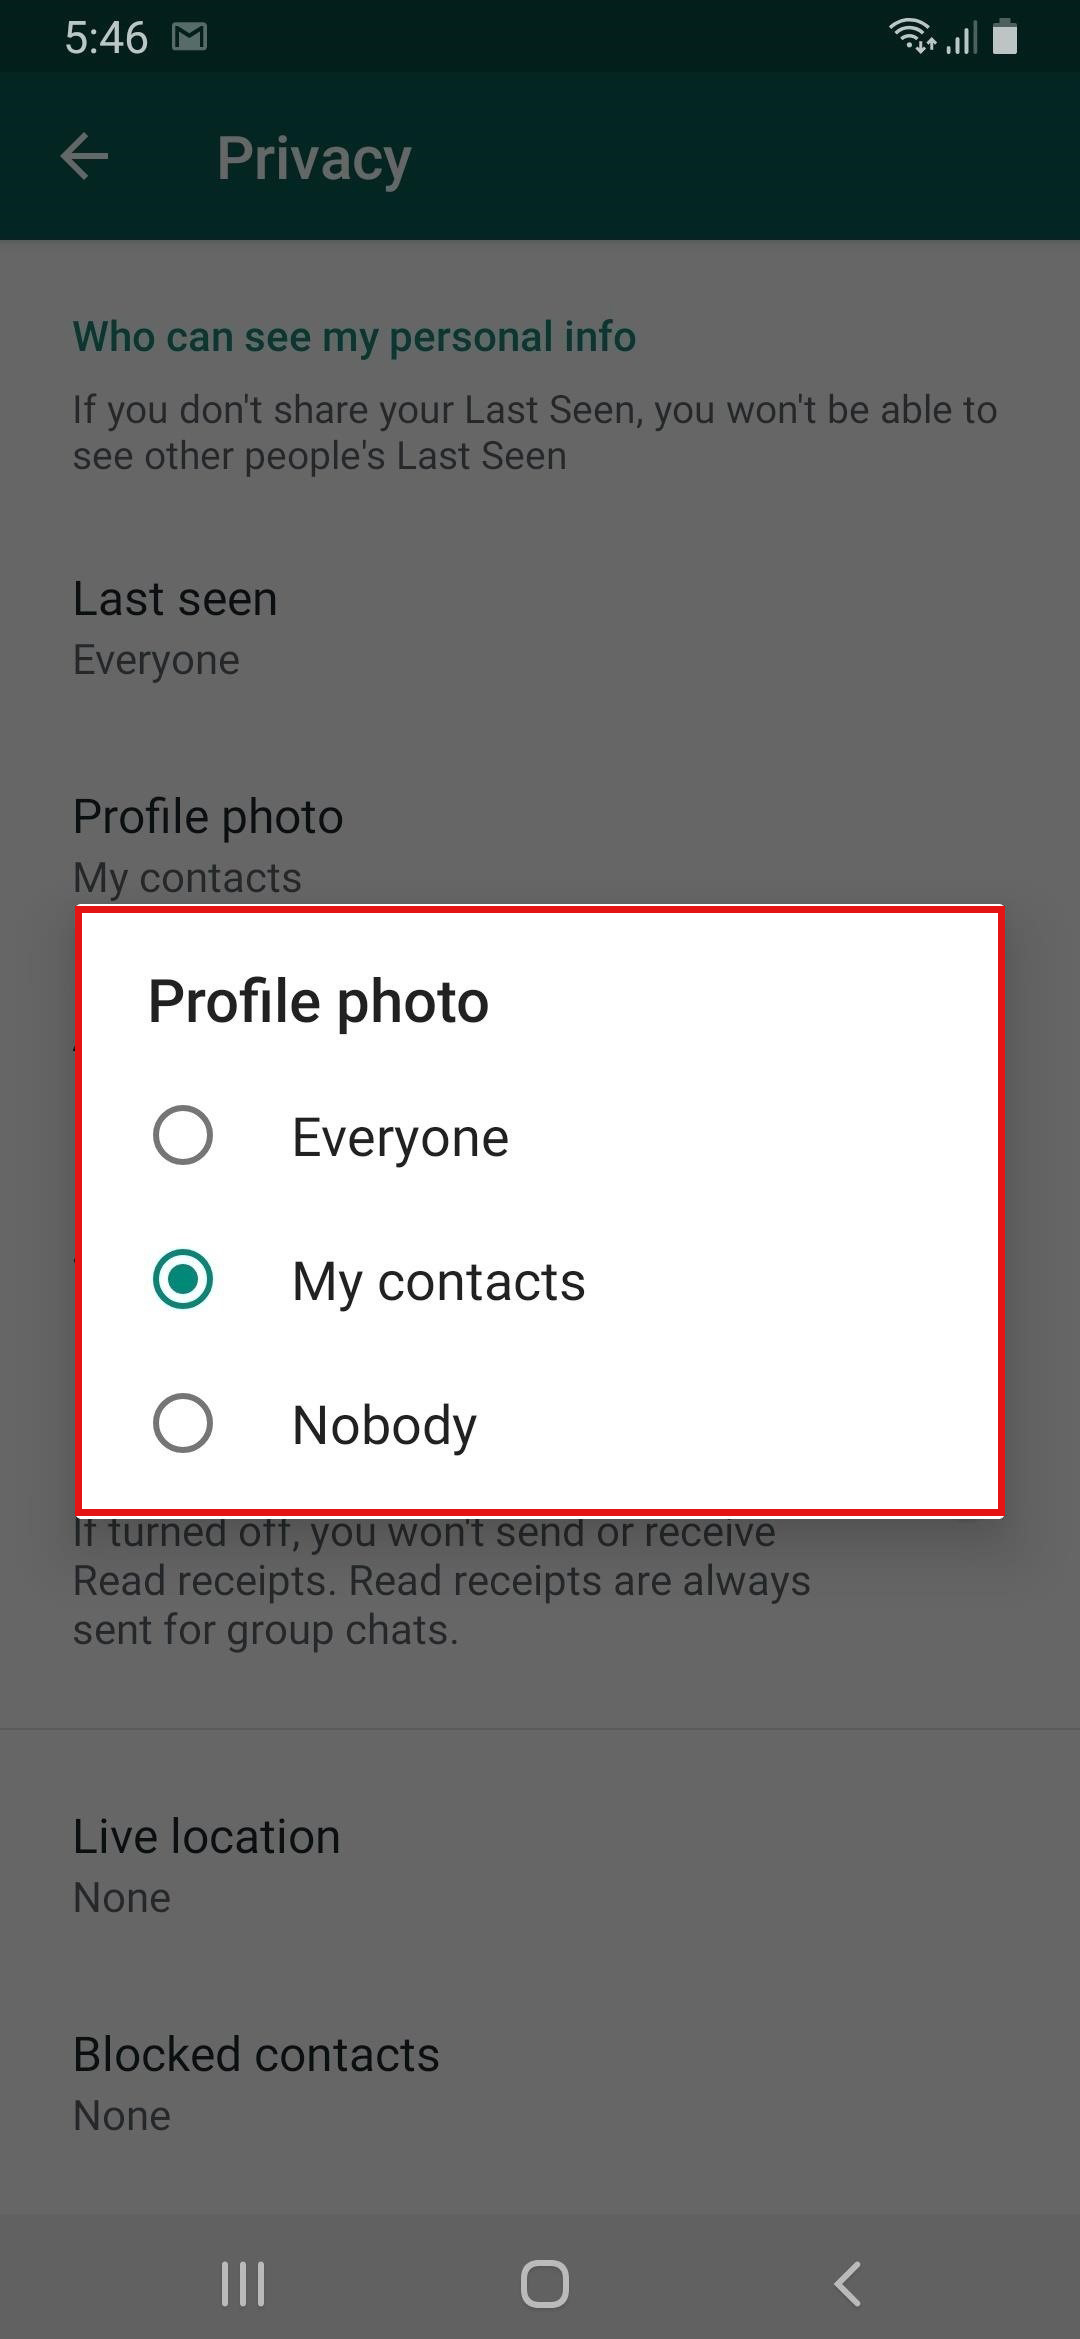 Restrict-access-to-your-profile-picture-in-whatsapp